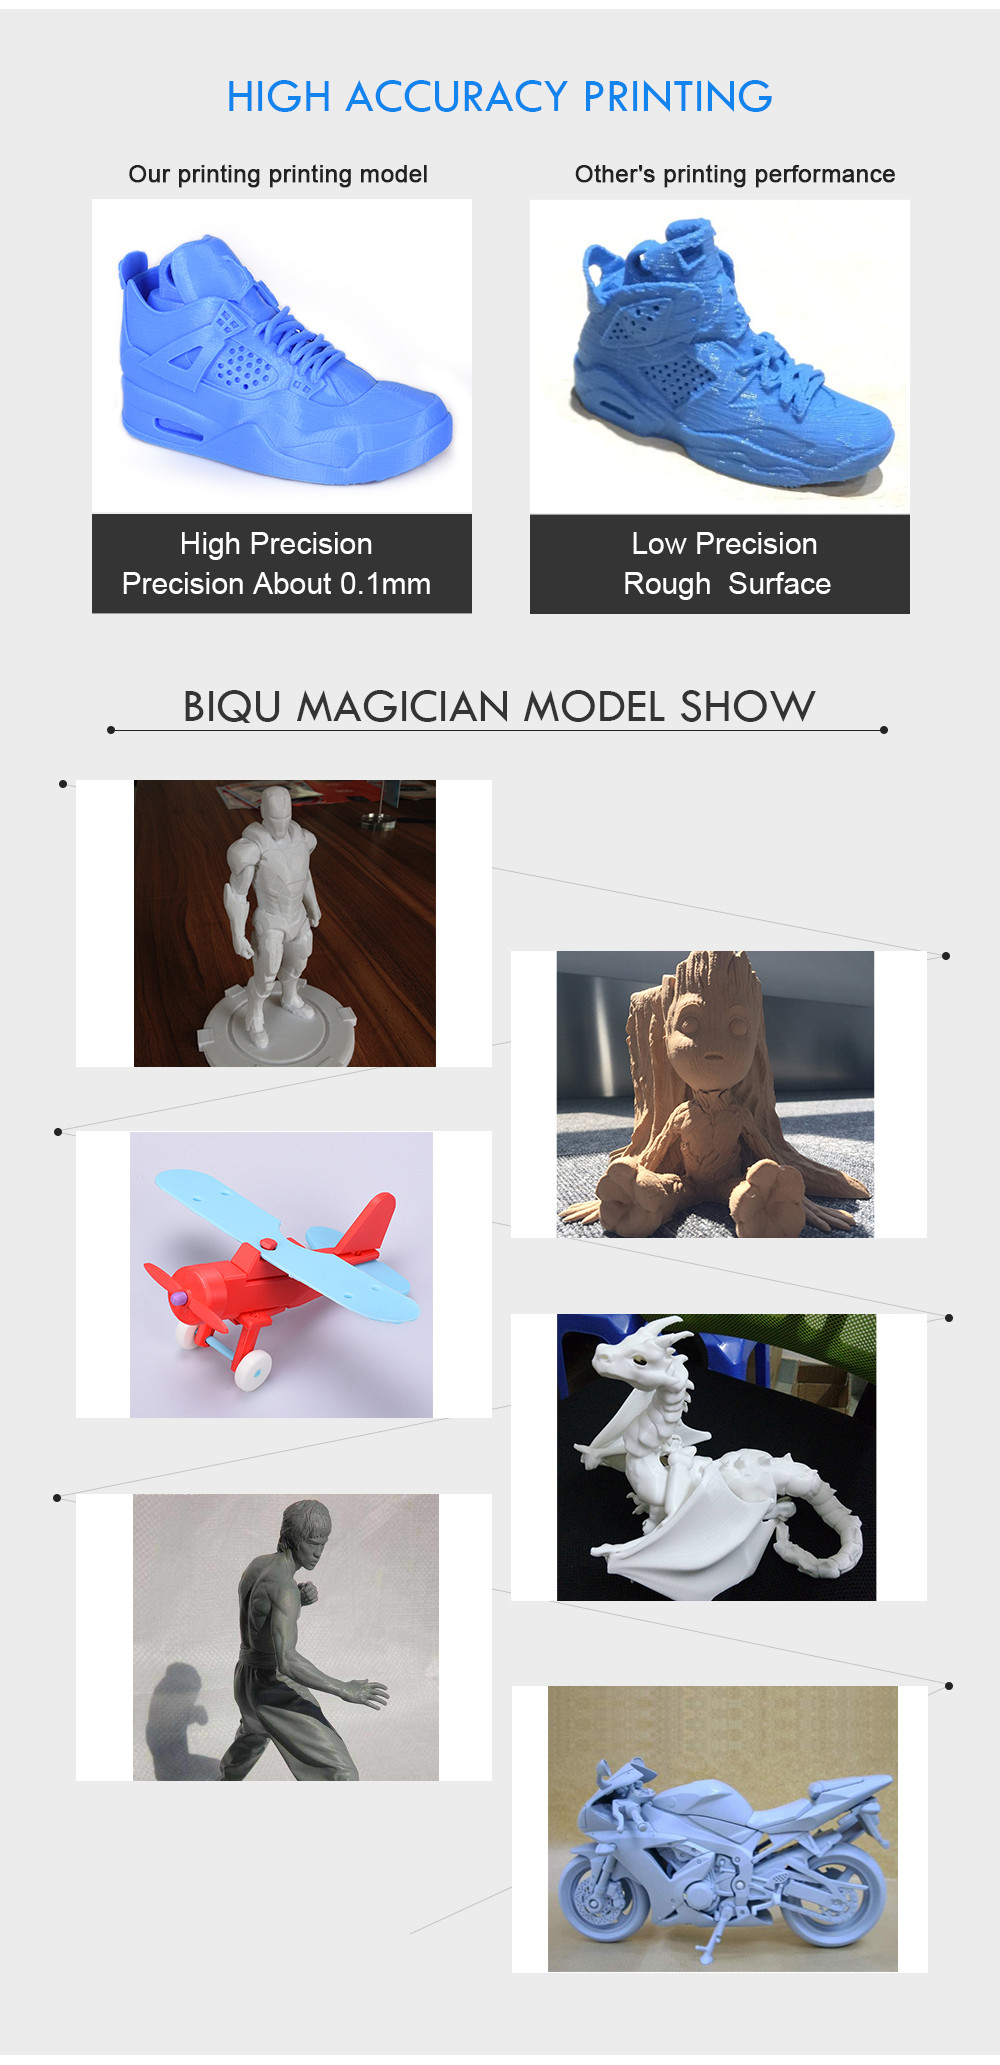 BIQU-Magician-Pre-assembled-3D-Printer-100150mm-Printing-Size-With-Auto-leveling-Support-Off-line-Pr-1227084